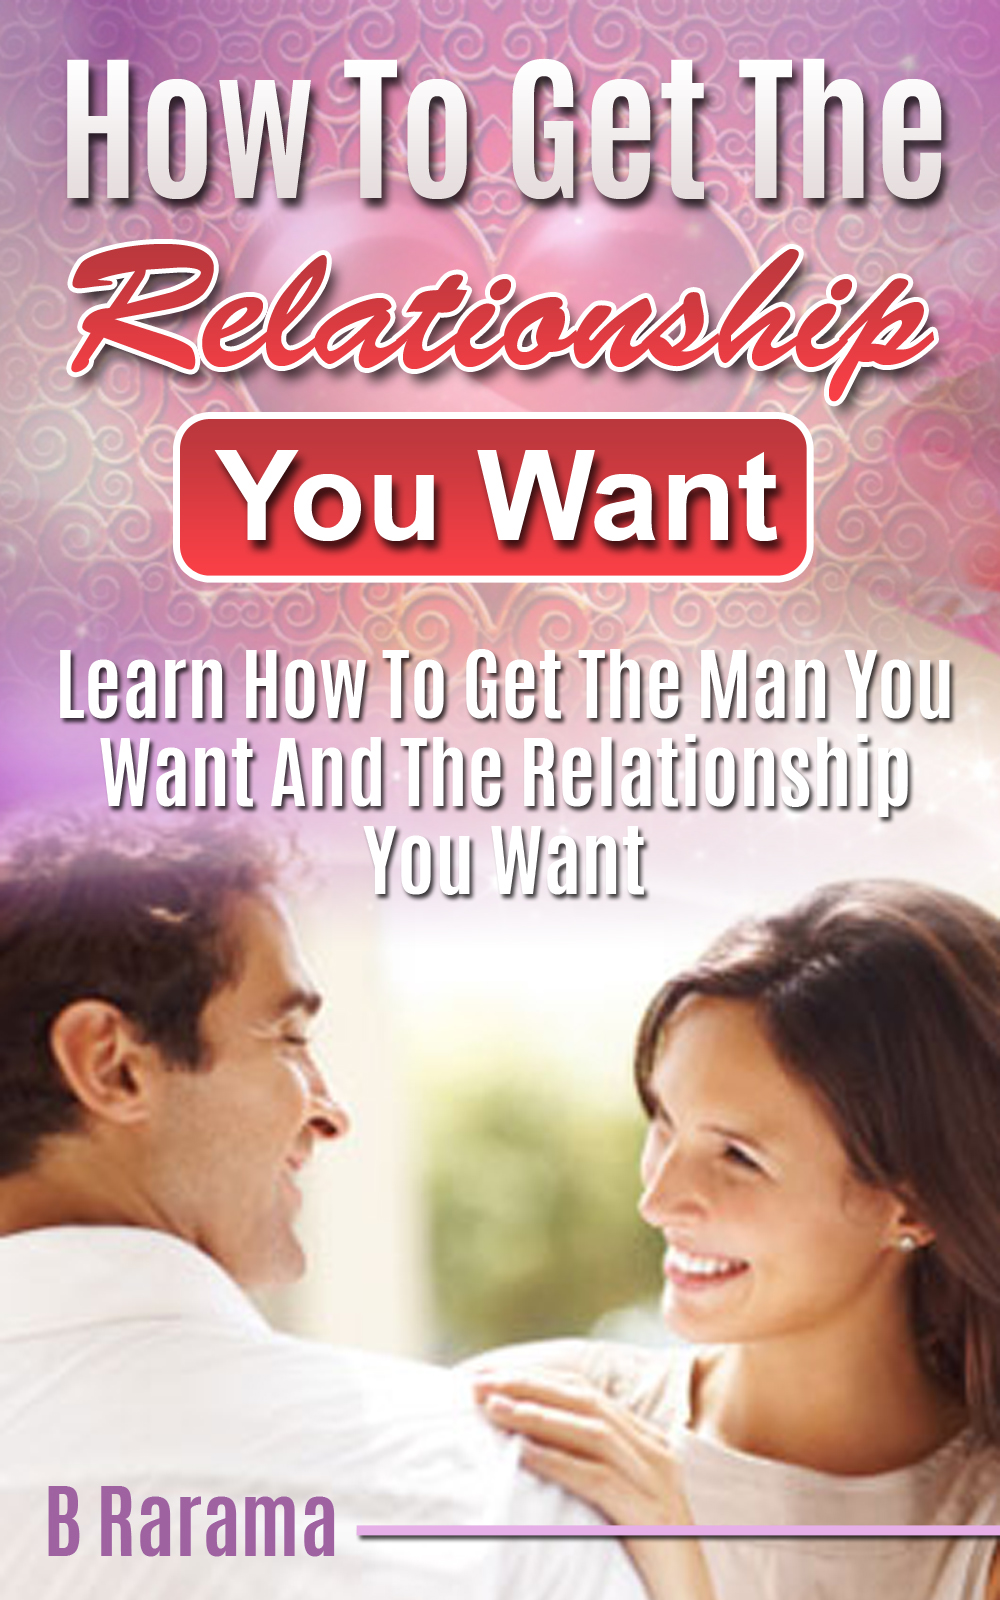 How to Get the Relationship You Want: Learn How To Get The Man You Want And The Relationship You Want by B Rarama